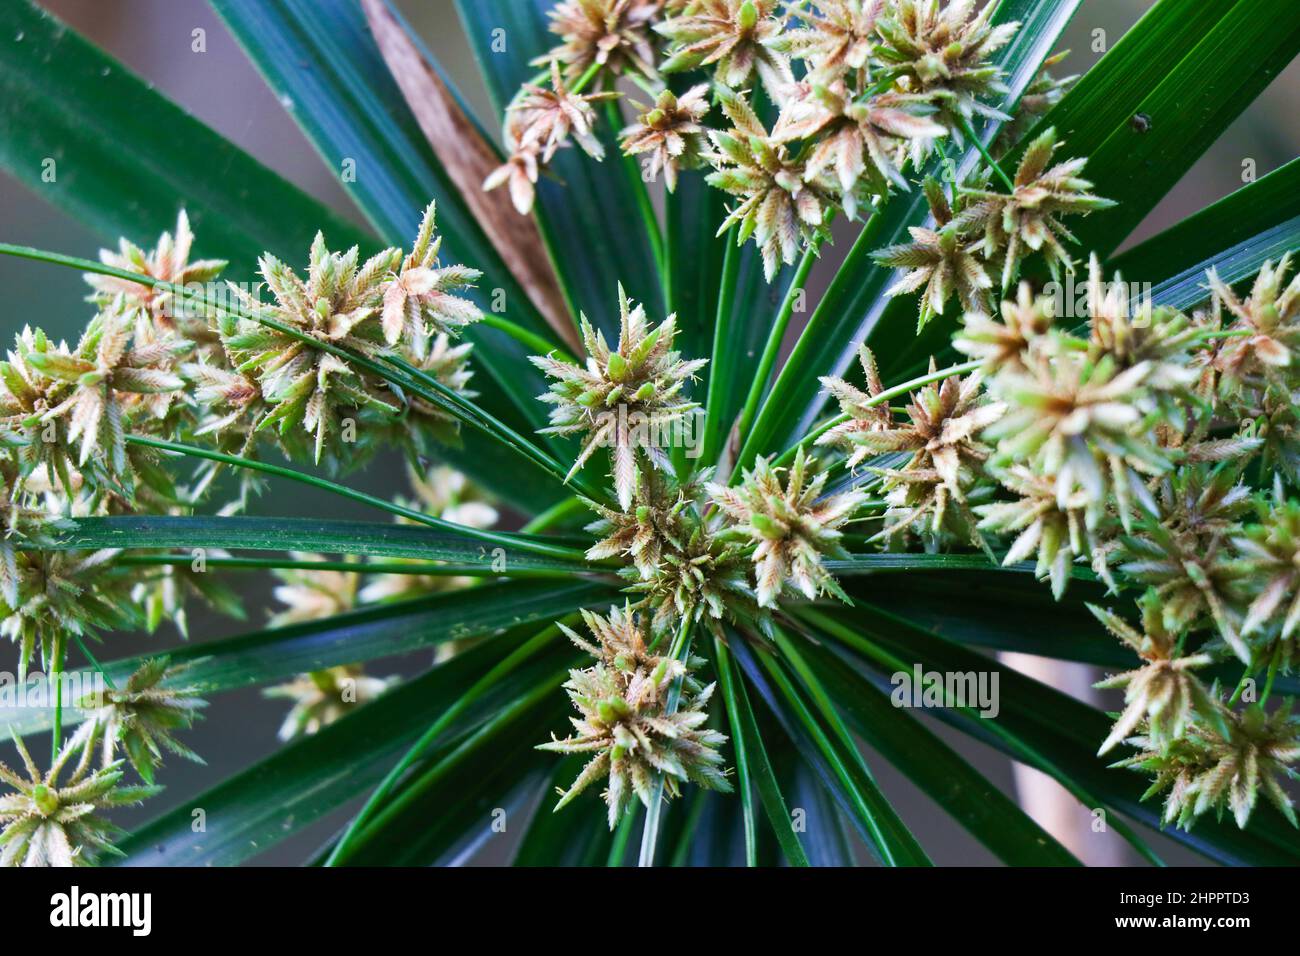 Umbrella plant with blooming flowers also called as Umbrella palm or Umbrella papyrus with scientific name Cyperus involucratus Stock Photo